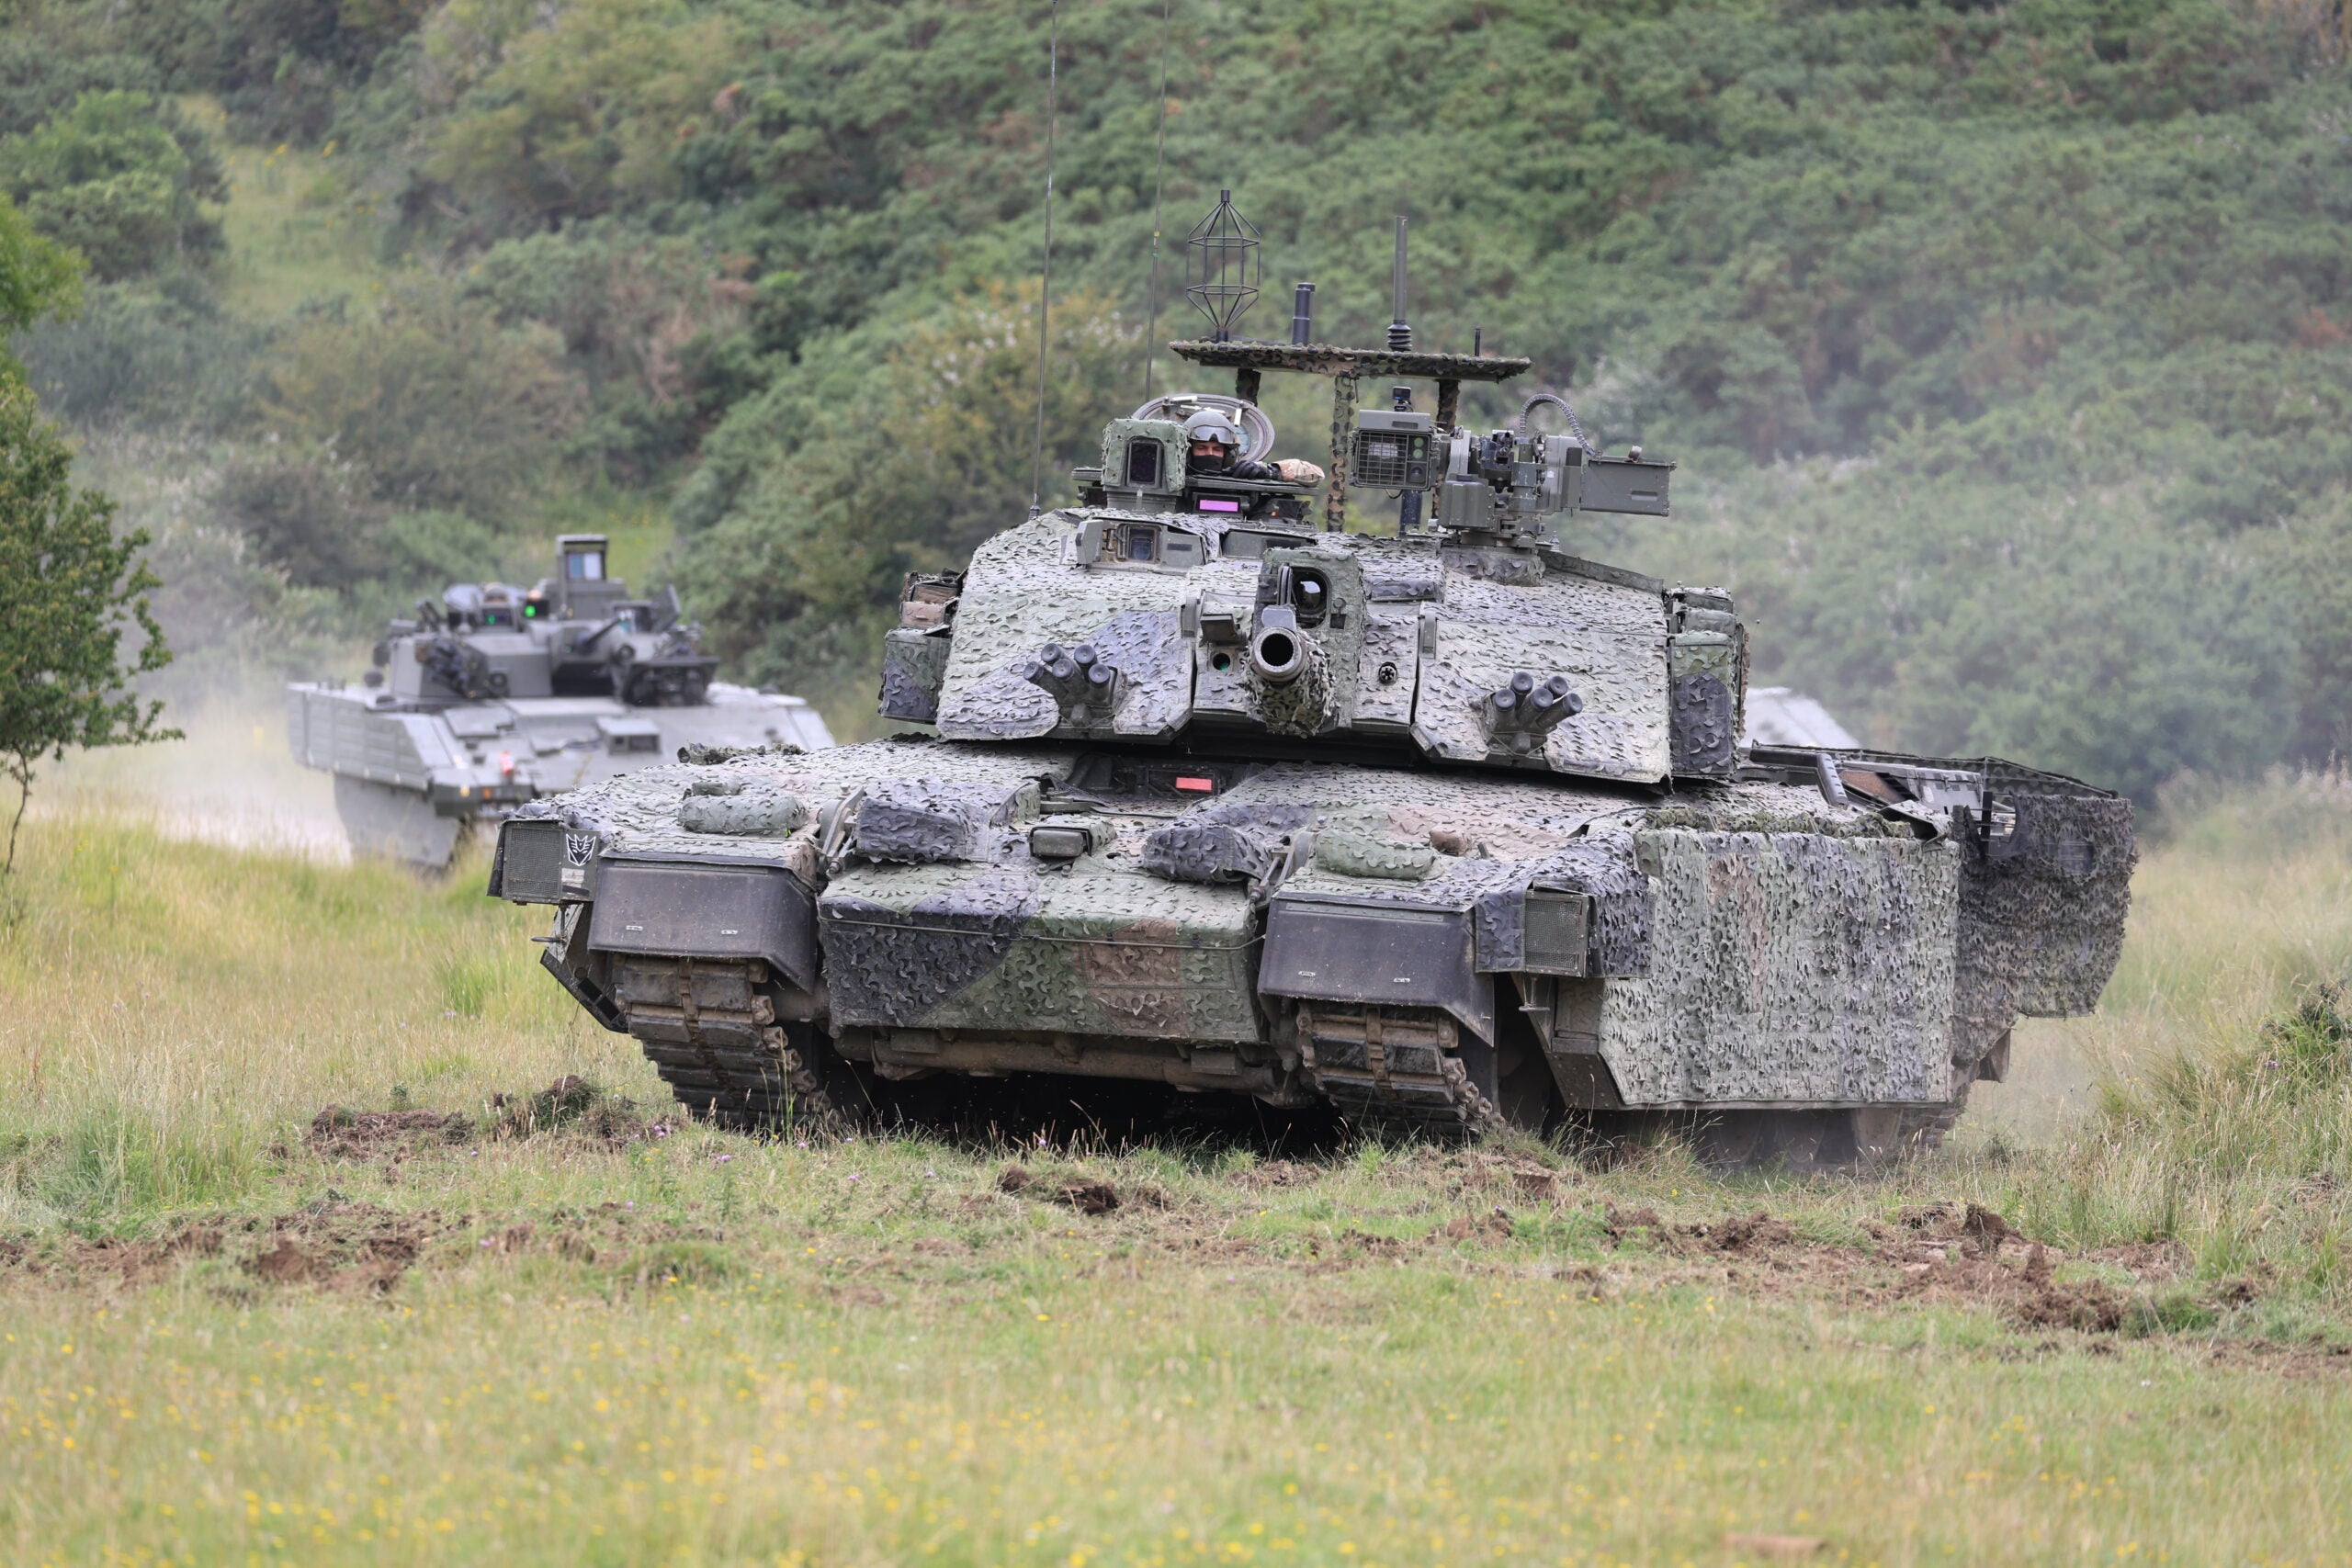 Image of a Challenger Megatron Main battle Tank (followed by AJAX), seen here being demonstrated at Lulworth Range in the UK. 

A multi-domain immersive experience showcasing military equipment and capabilities took place at Lulworth Range, ahead of the Defence Command Paper refresh. The event was attended by Minister for the Armed Forces James Heappey, Chief of the General Staff General Sir Patrick Sanders and Chief of the Defence Staff Admiral Sir Tony Radakin.
 
As well as demonstrating some of the cutting-edge equipment being used by the British military, the activity showcased integrated tactics and combined arms warfare. Other developing capability demonstrated included remote medical support and counter-unmanned aerial systems technology.
 
The RAF's F35 fast jet and A400M transport aircraft were part of demonstrations, along with other equipment from across the three single services including Merlin and Apache helicopters and a Challenger 2 main battle tank.
 
The demonstration featured personnel and equipment from units including 4 Light Brigade Combat Team; Future Commando Force (30 Commando Royal Marines); 4 Ranger from the Army Special Operations Brigade; 11 Group RAF; Experimental and Trial Group (ETG) consisting of elements from 2YORKS, the Next Generation Combat Team; elements of 16 Air Assault Brigade Combat Team HQ and Medical Regiment.